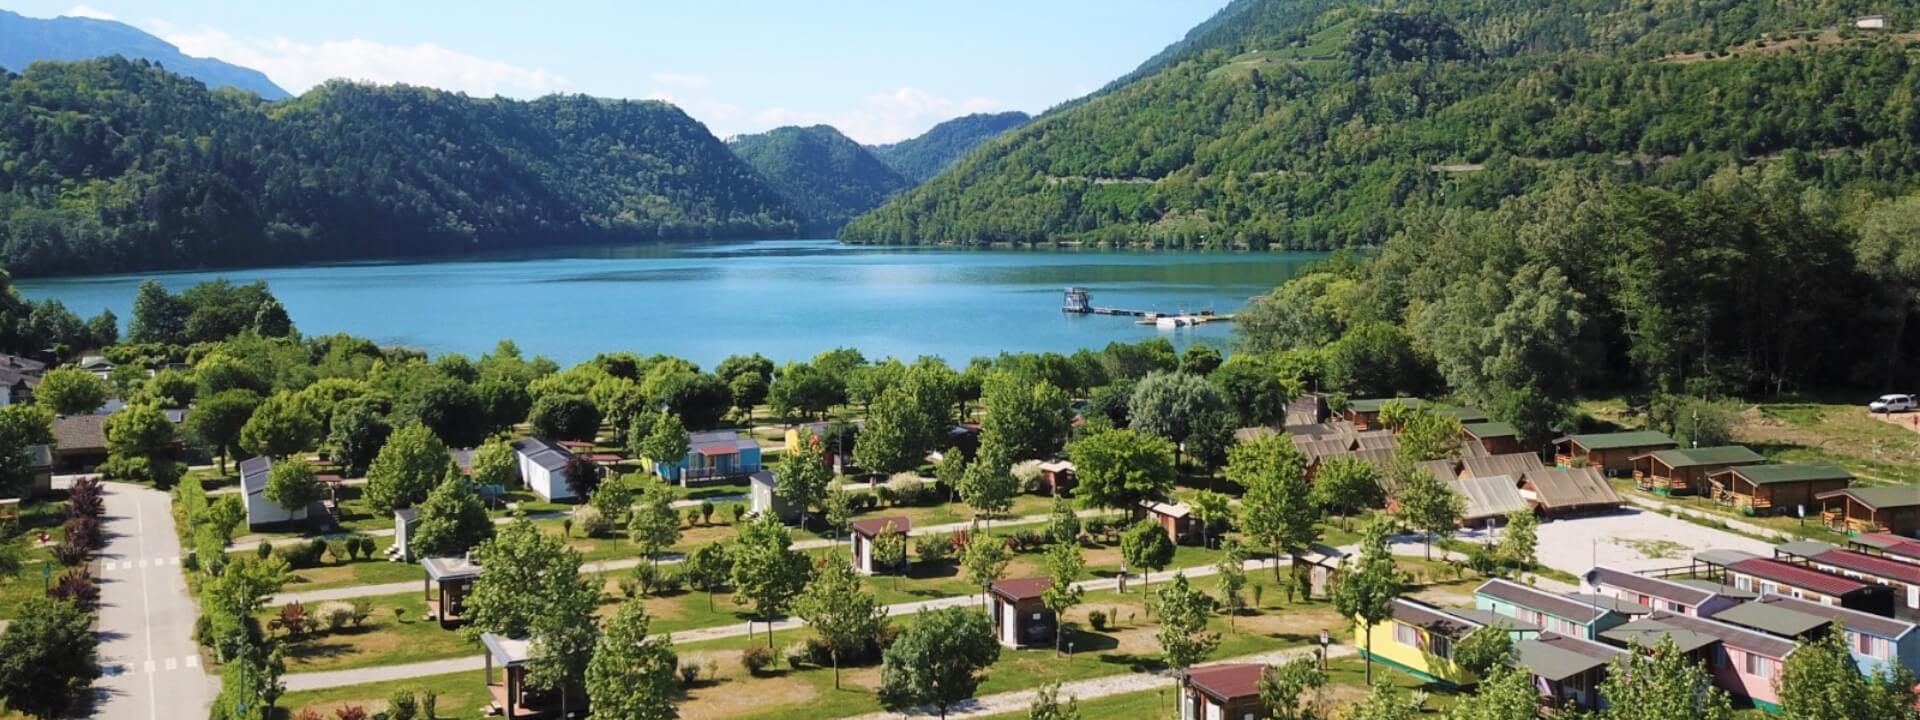 campinglevico en september-offer-lago-levico-campsite-ideal-for-hiking-and-trekking 005